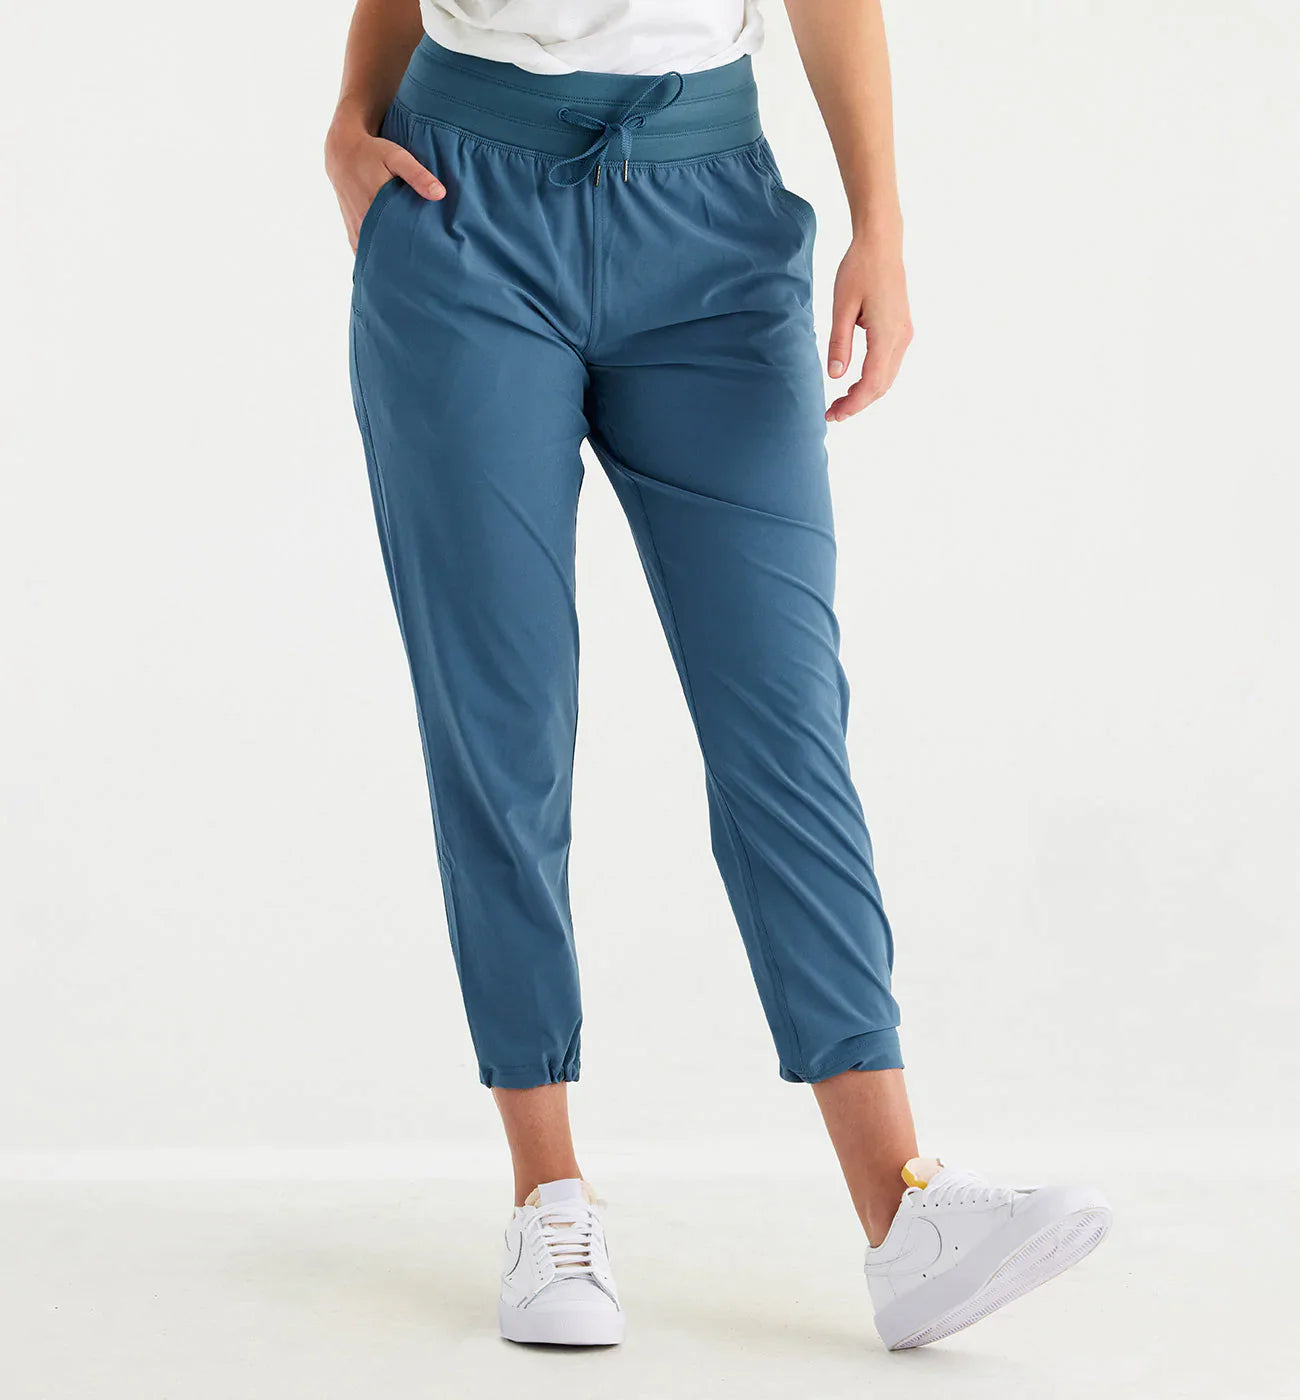 Free Fly Women's Breeze Cropped Pants - Pacific Blue - Southern Sol